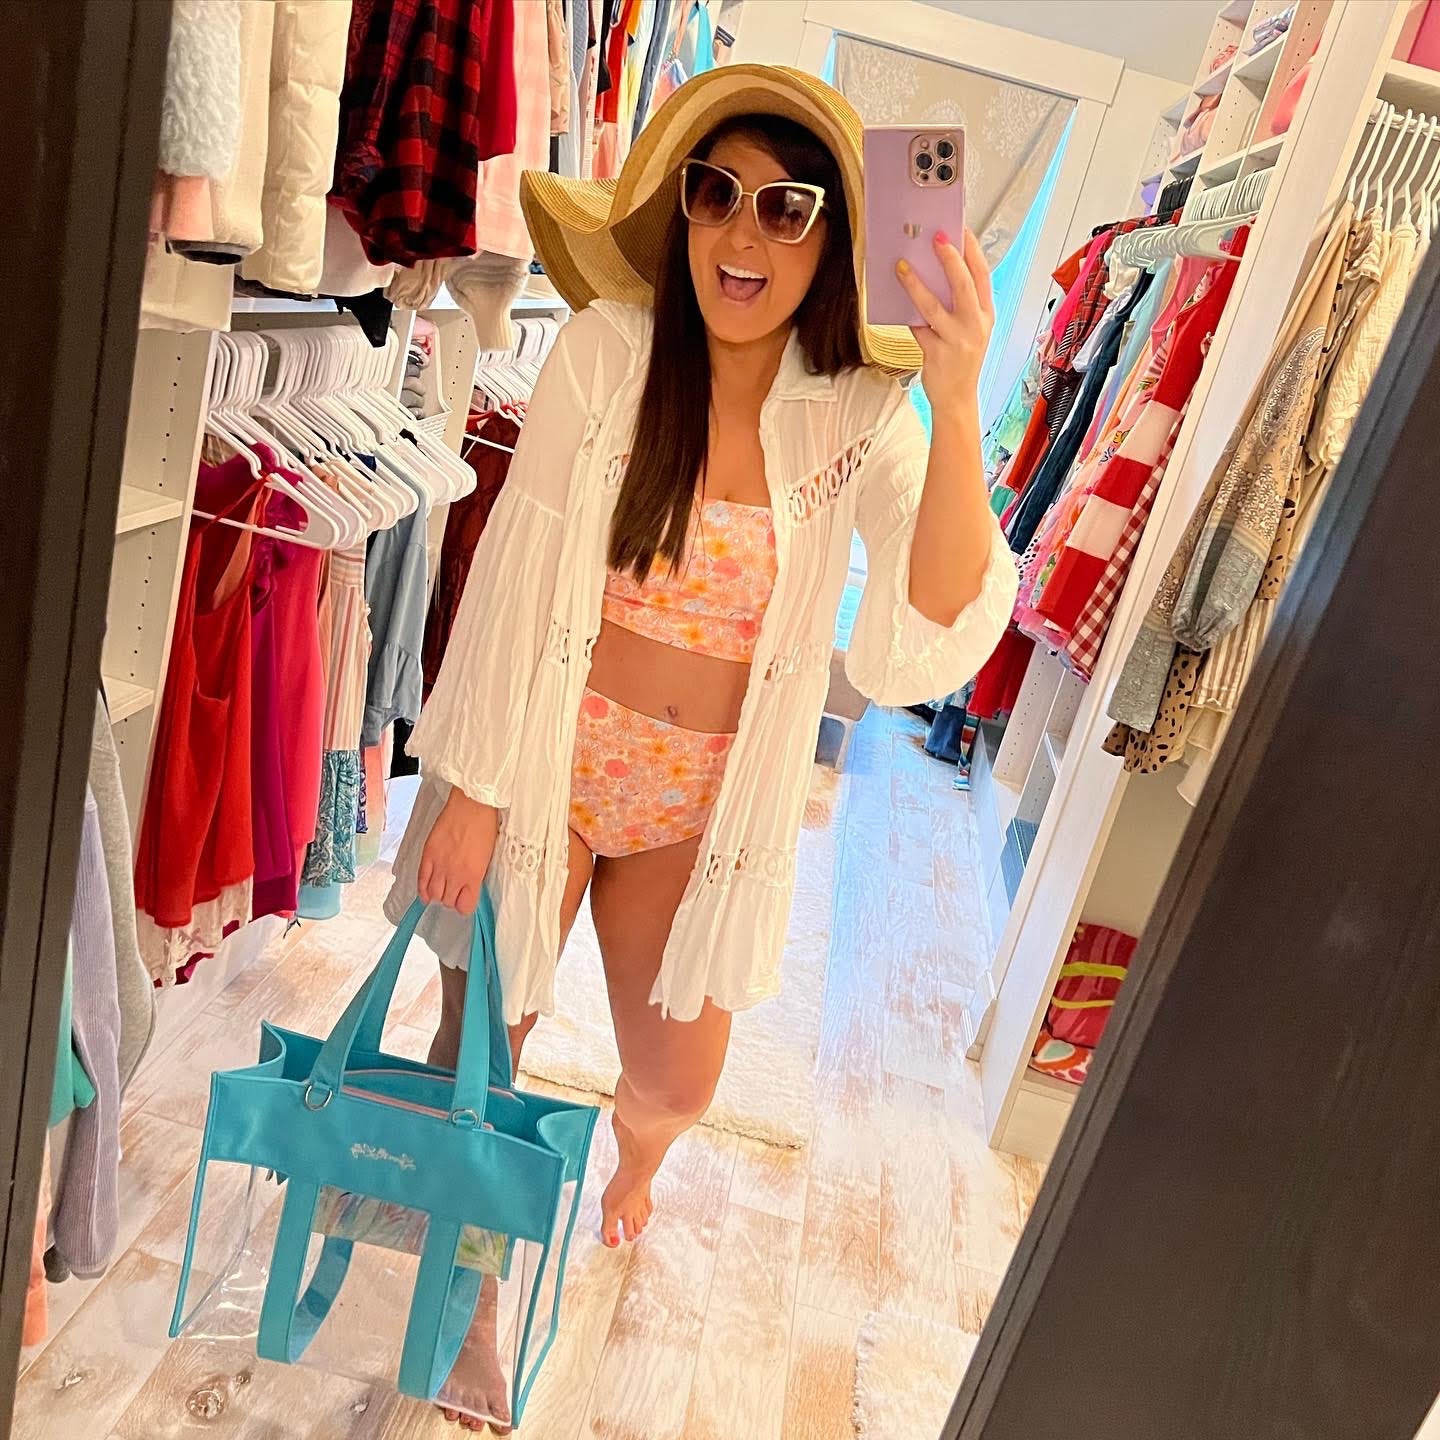 lynn lilly wearing swimsuit holding everyone tote